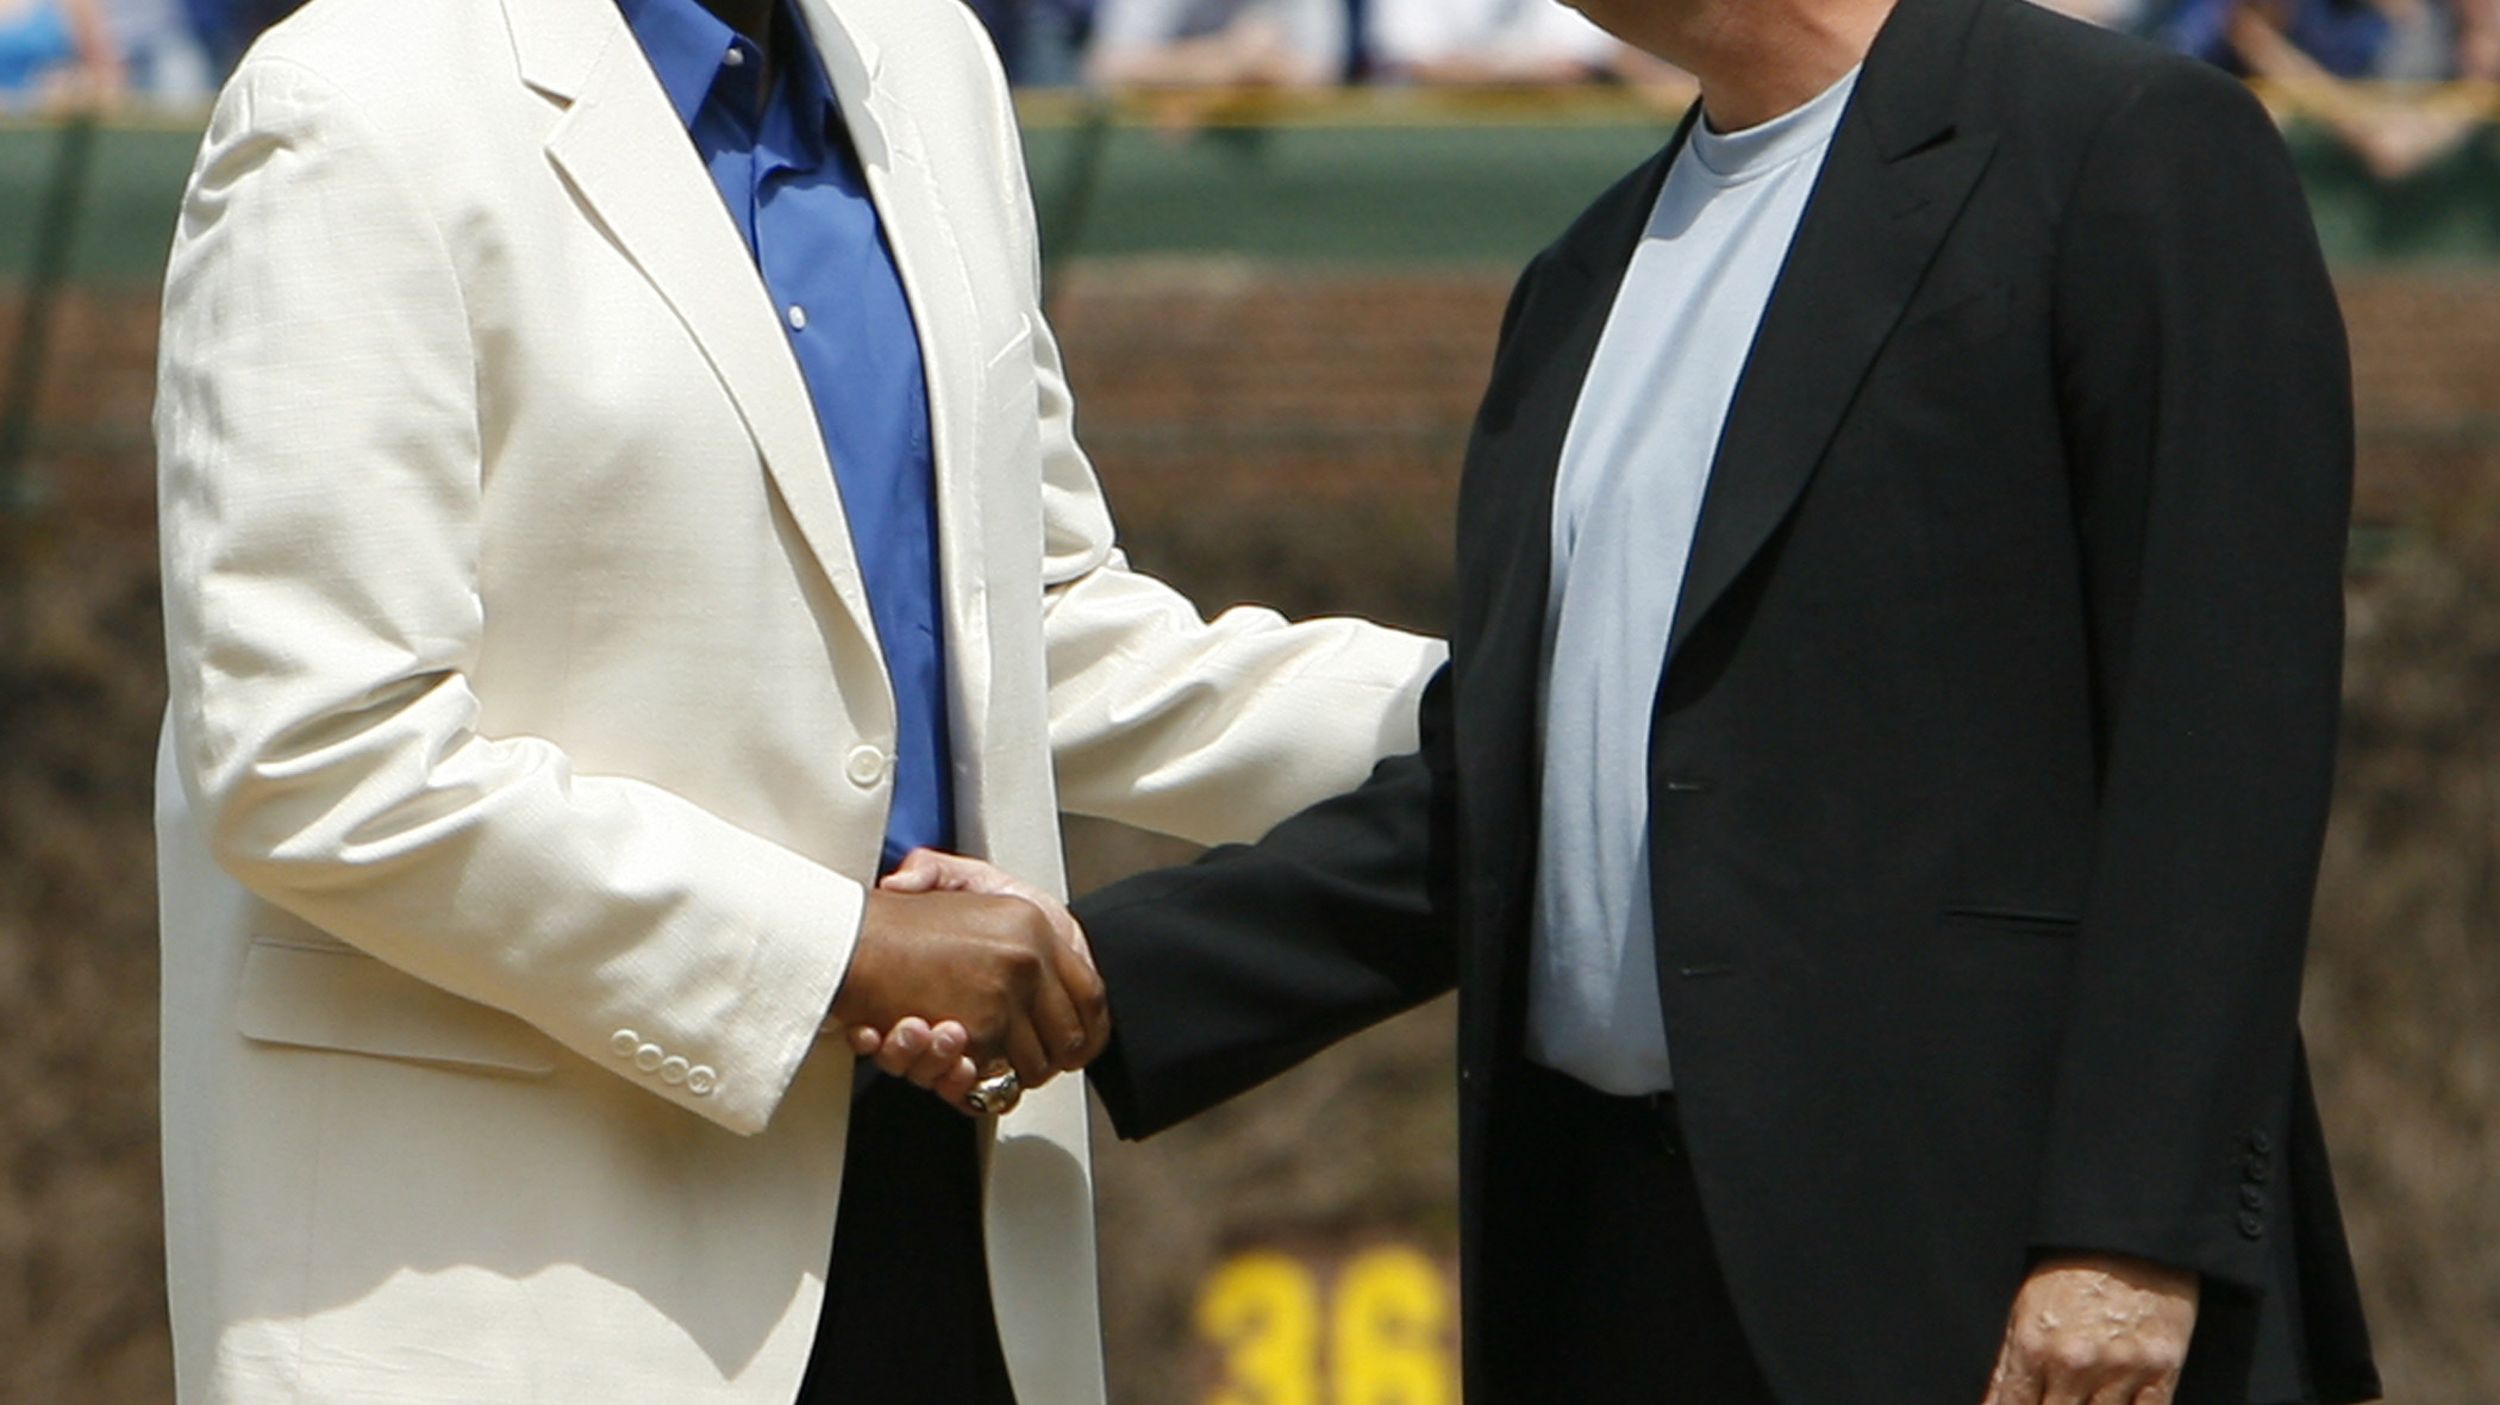 Cubs to retire No. 31 for Jenkins, Maddux